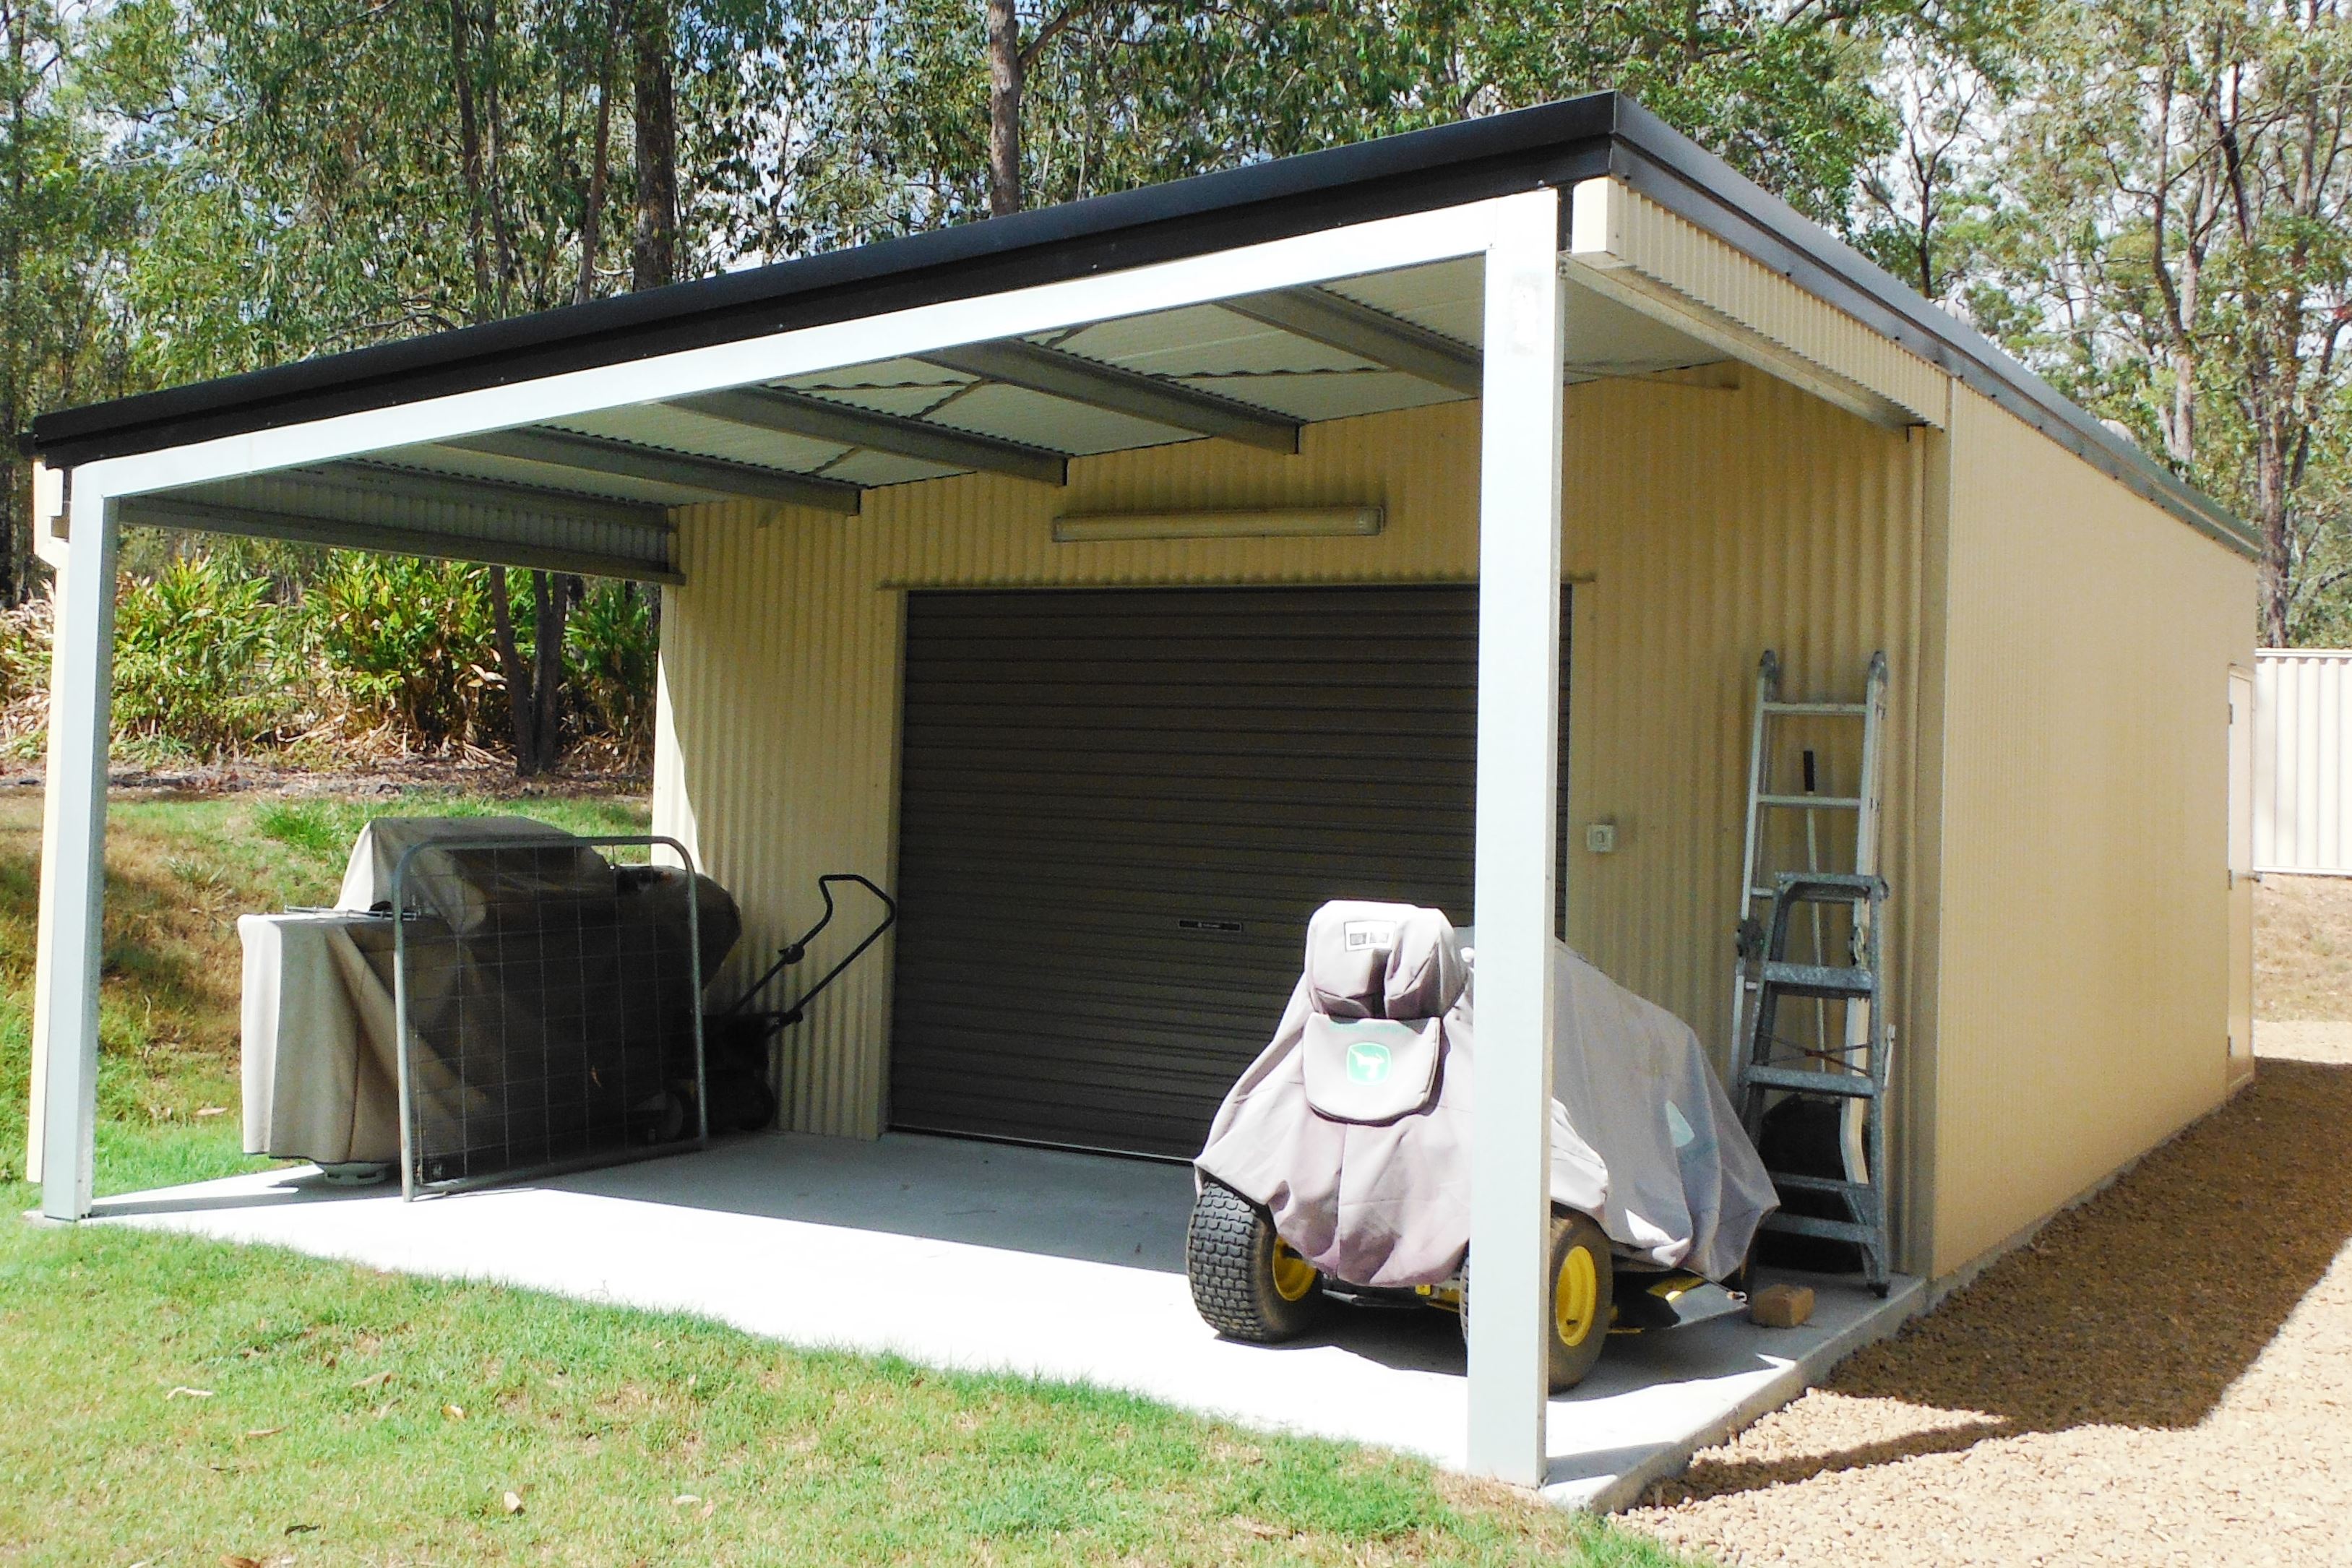 Carports For Sale View Sizes Prices Best Sheds